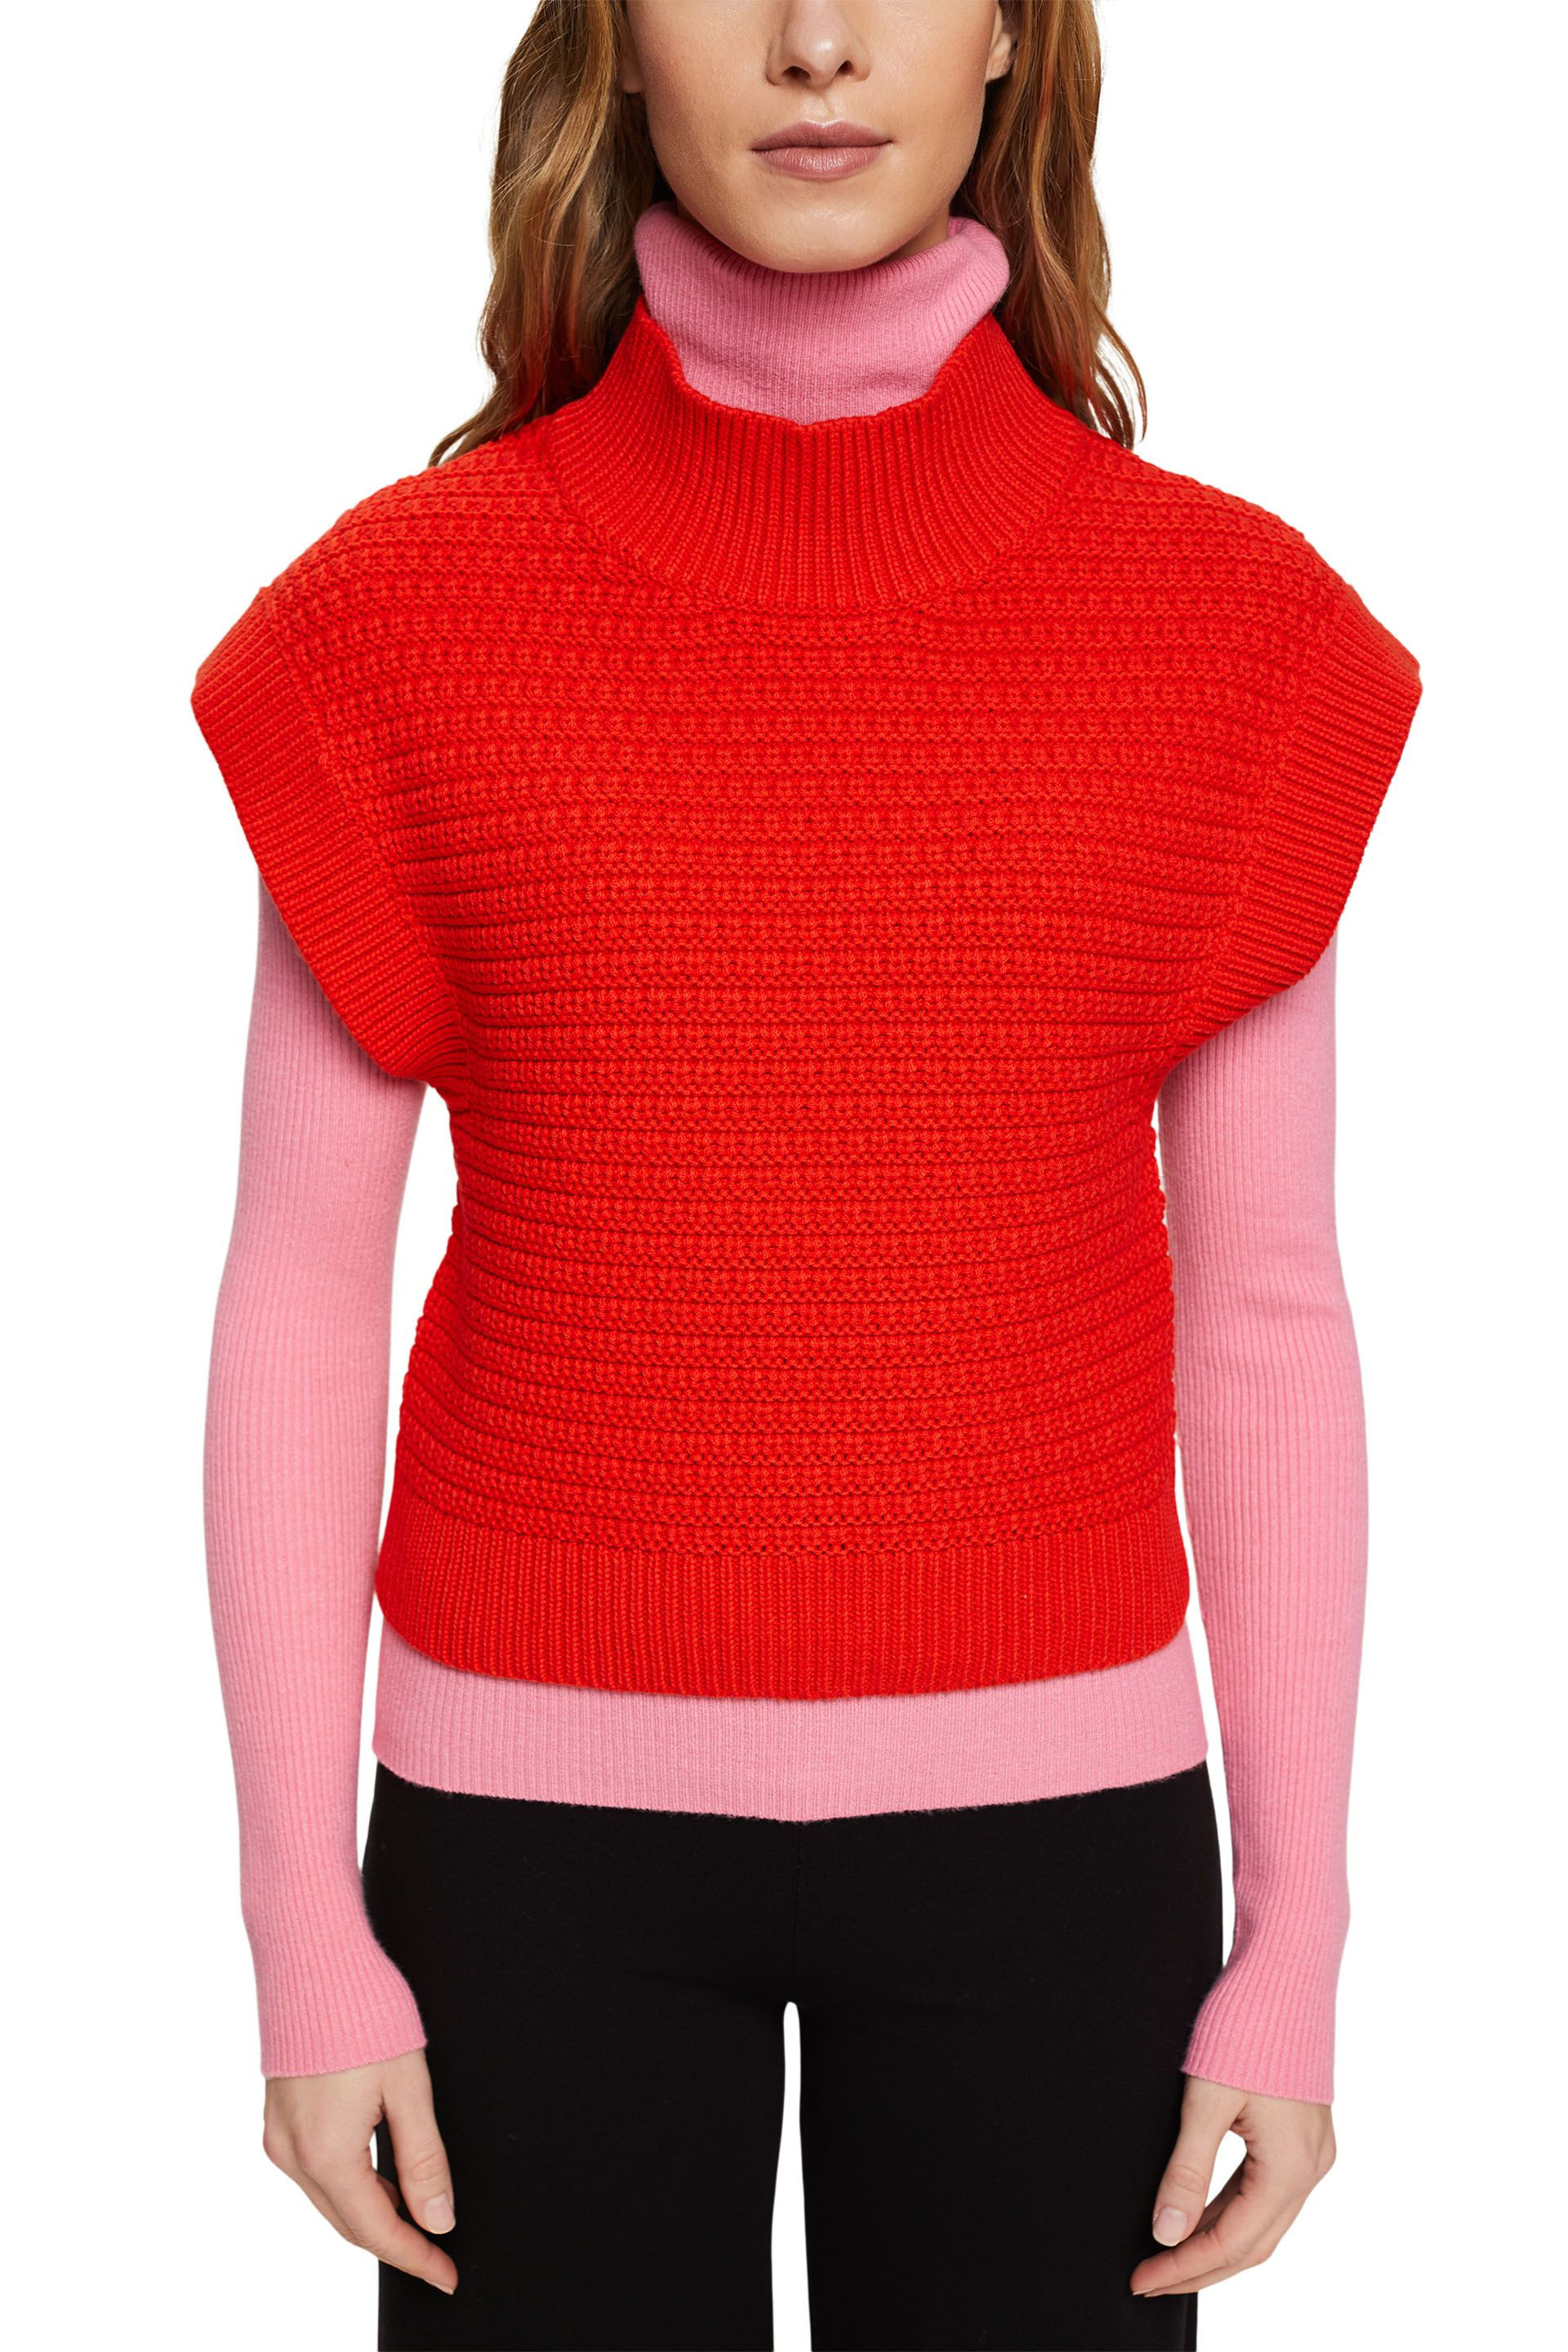 Esprit - Gilet a maglia in misto cotone, Rosso, large image number 1